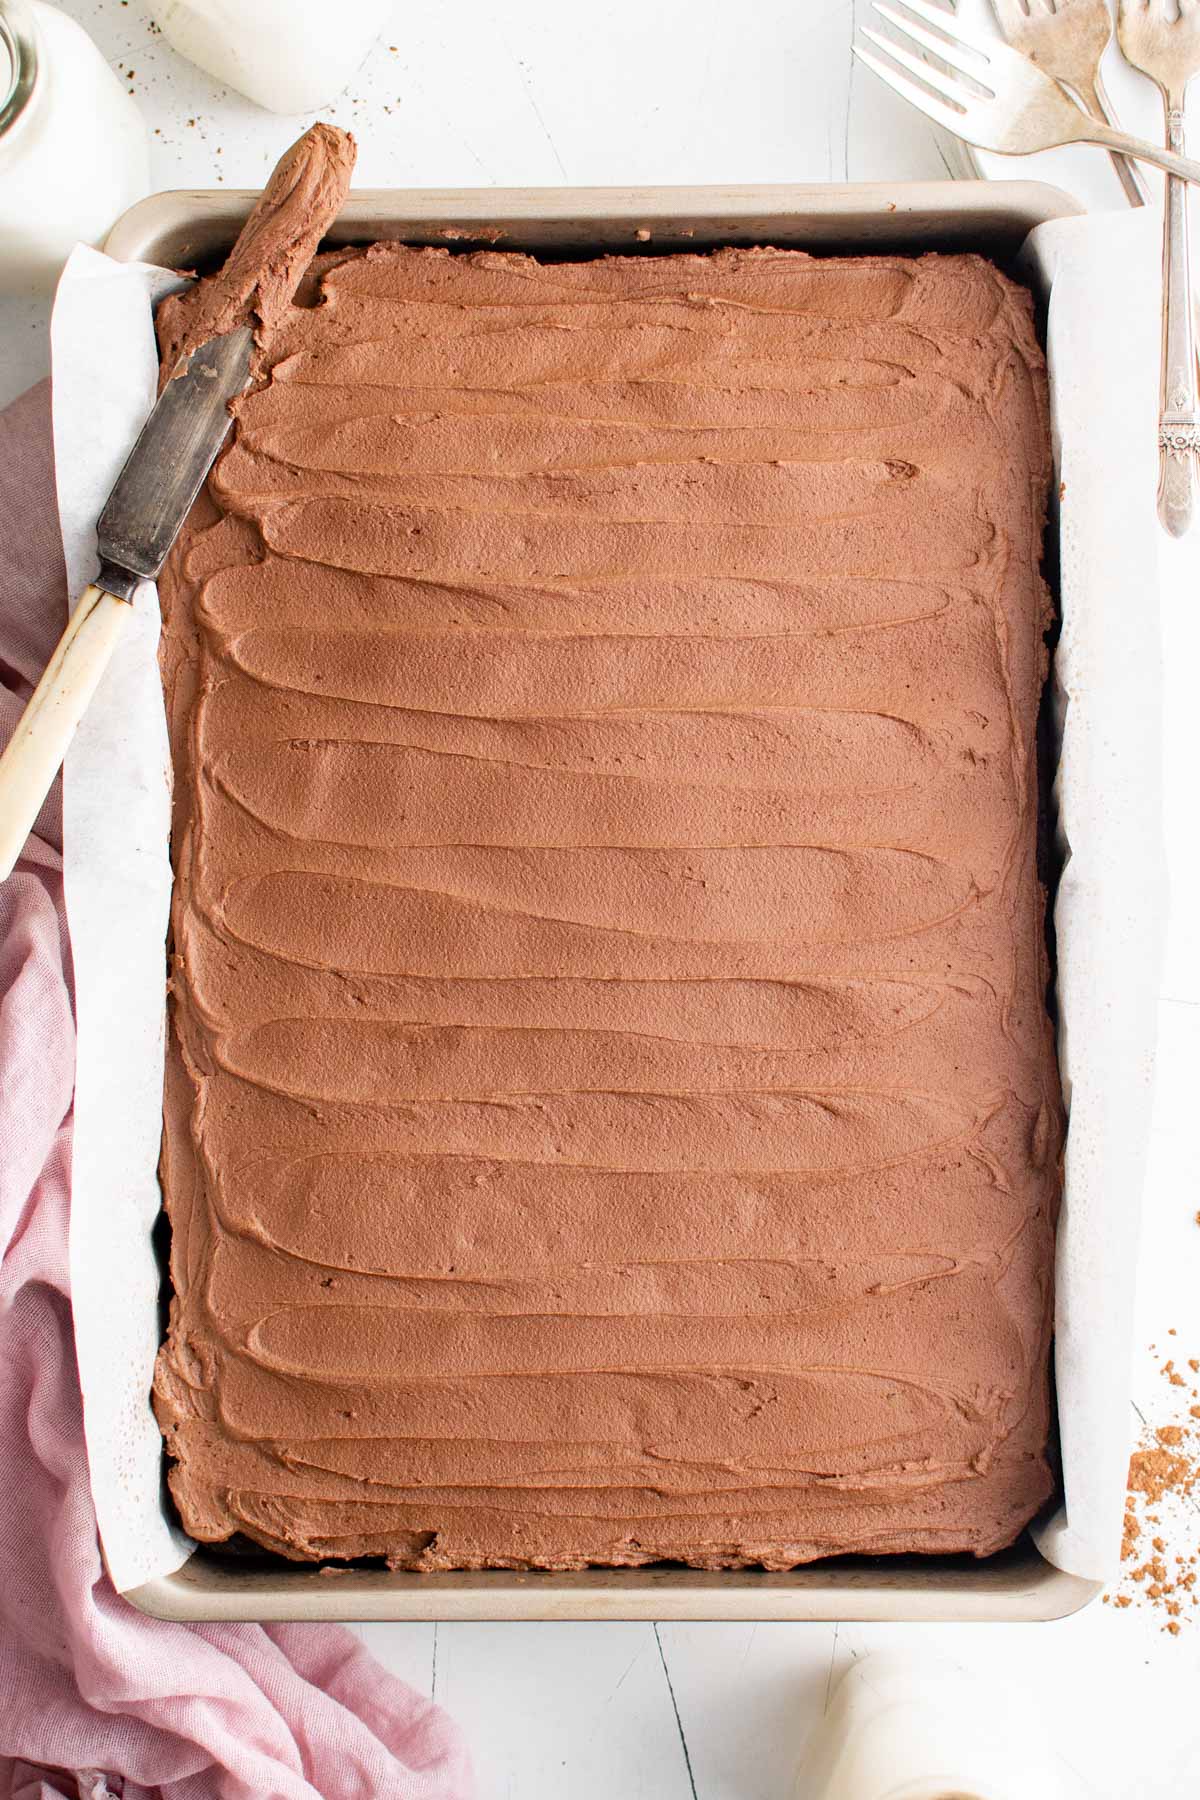 Whole frosted chocolate cake in a baking pan with a knife.